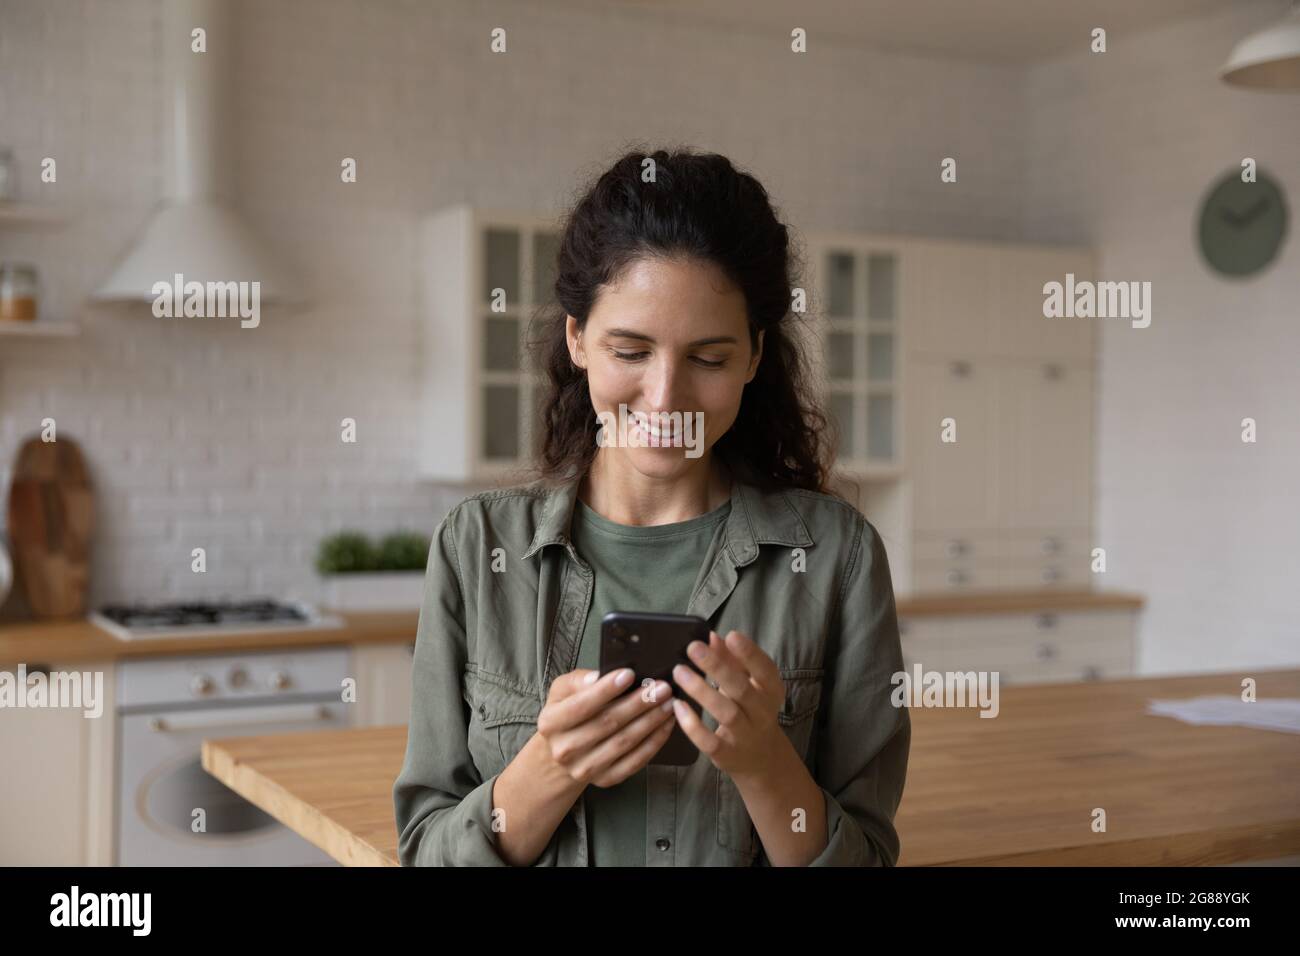 Young lady look at phone screen chat online at kitchen Stock Photo